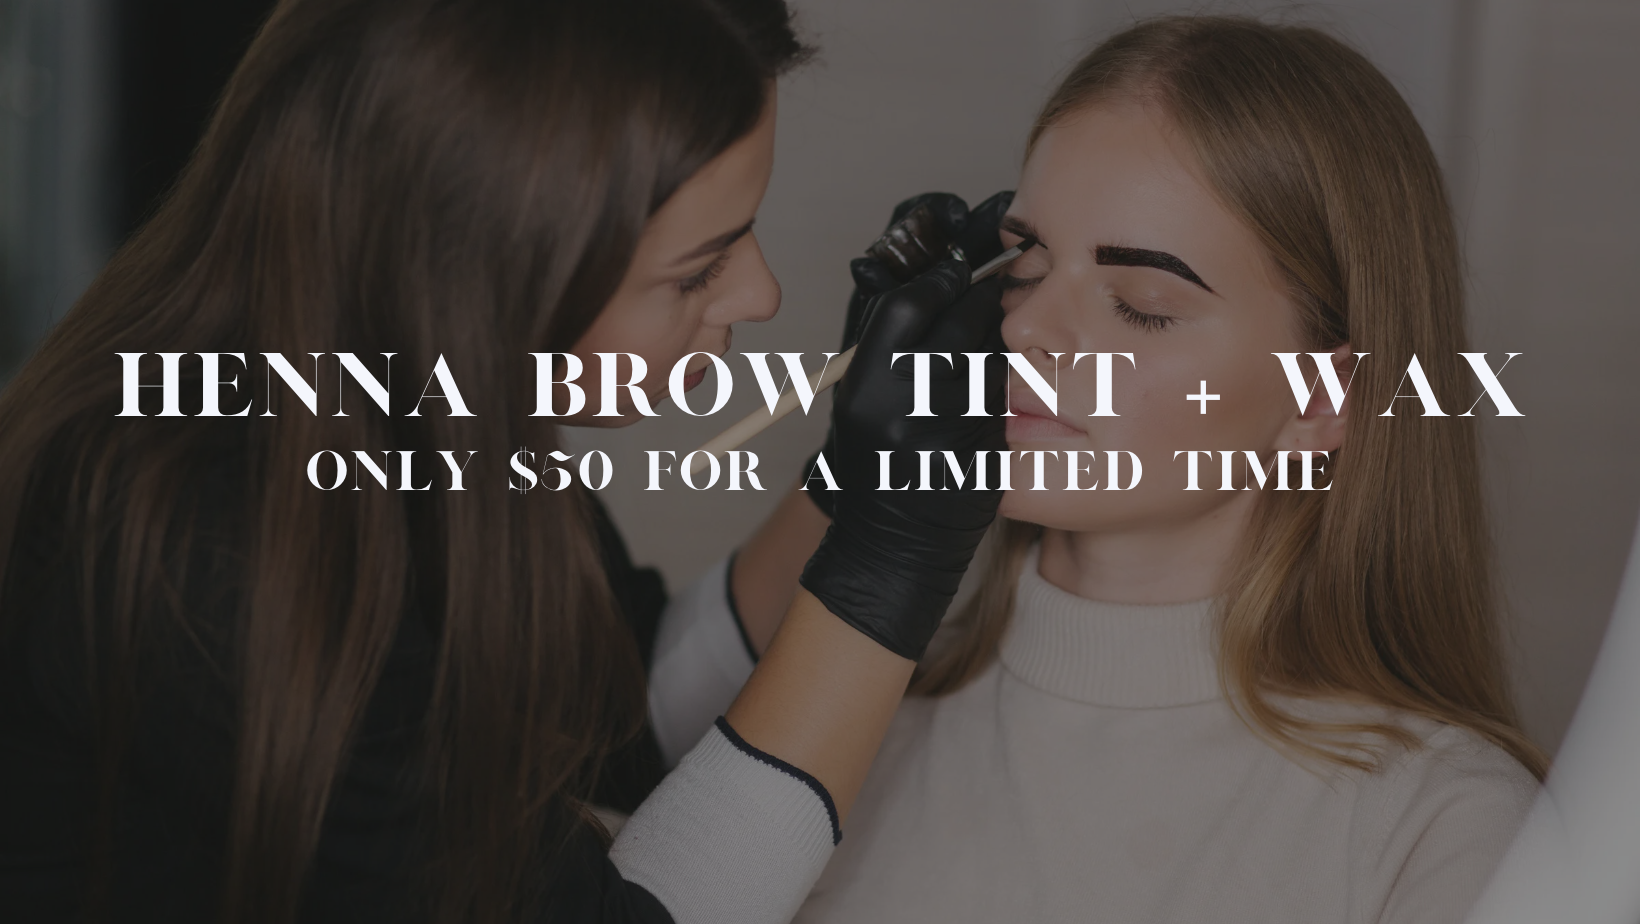 Woman applying brow tint with text overlay that says "Henna Brow Tint + Wax, Only $50 for a limited time"